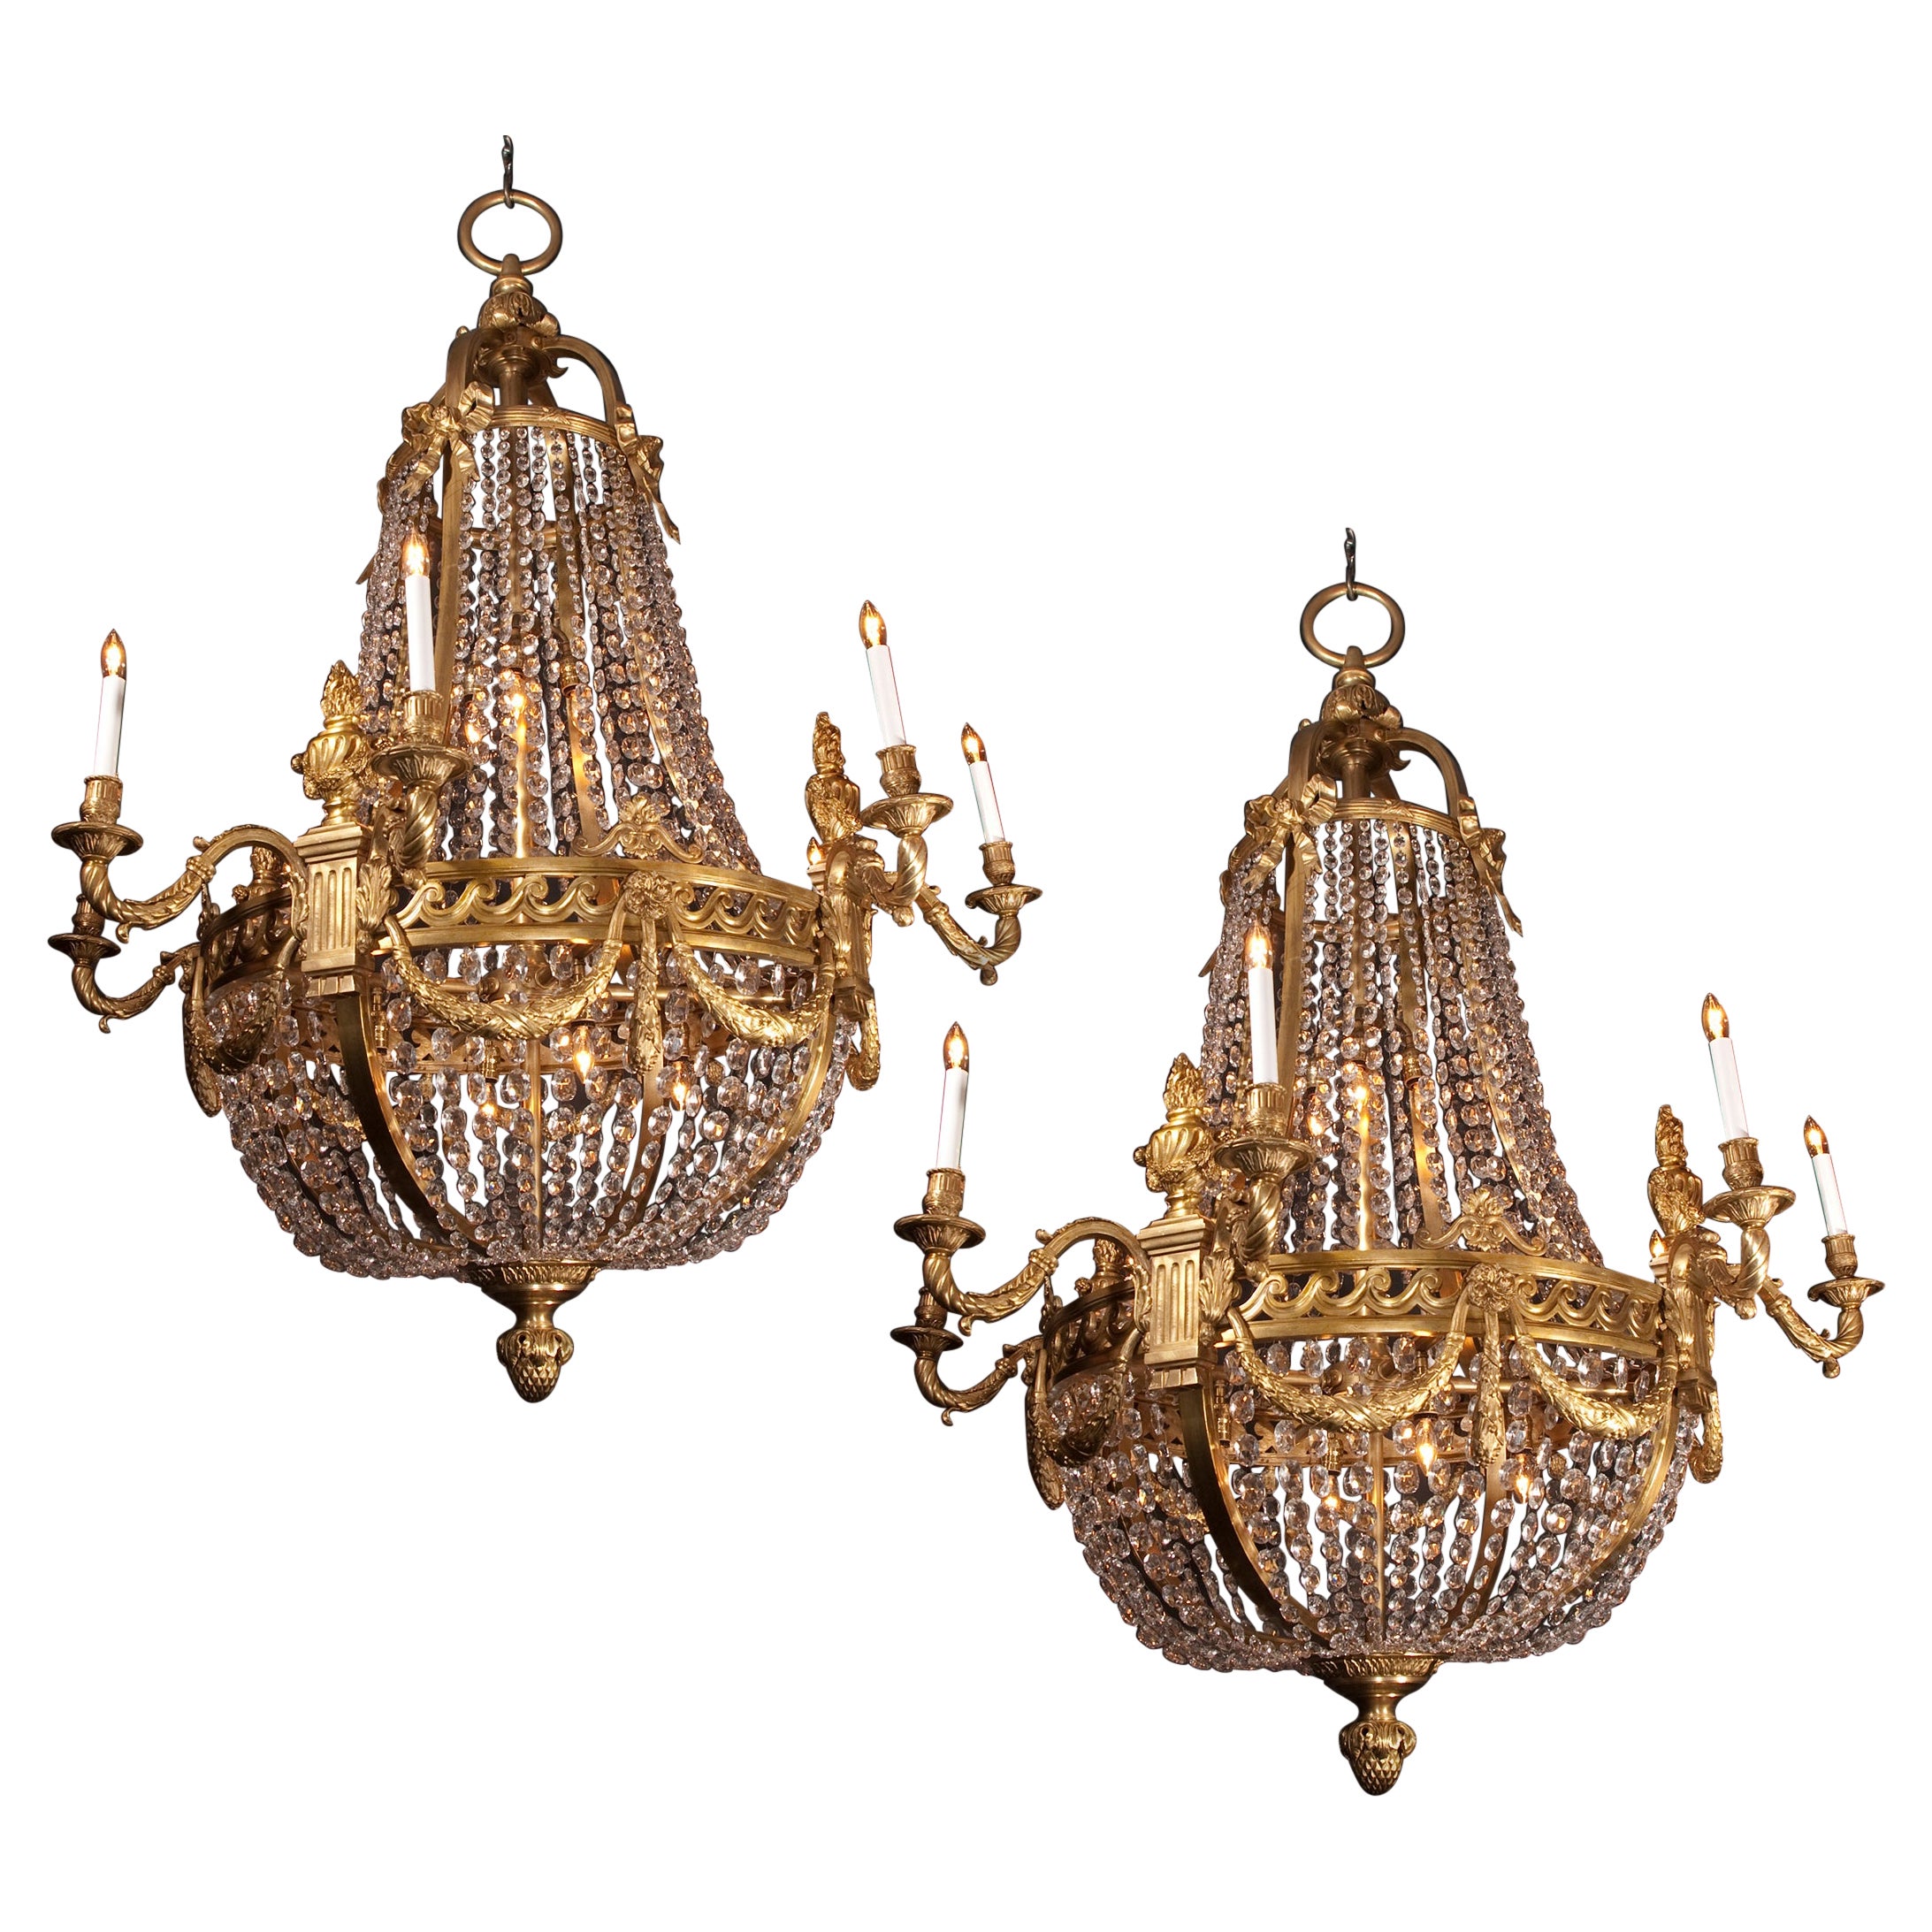 Pair of Large, Grand Louis XVI Bronze & Crystal Chandeliers, 19th Century French For Sale